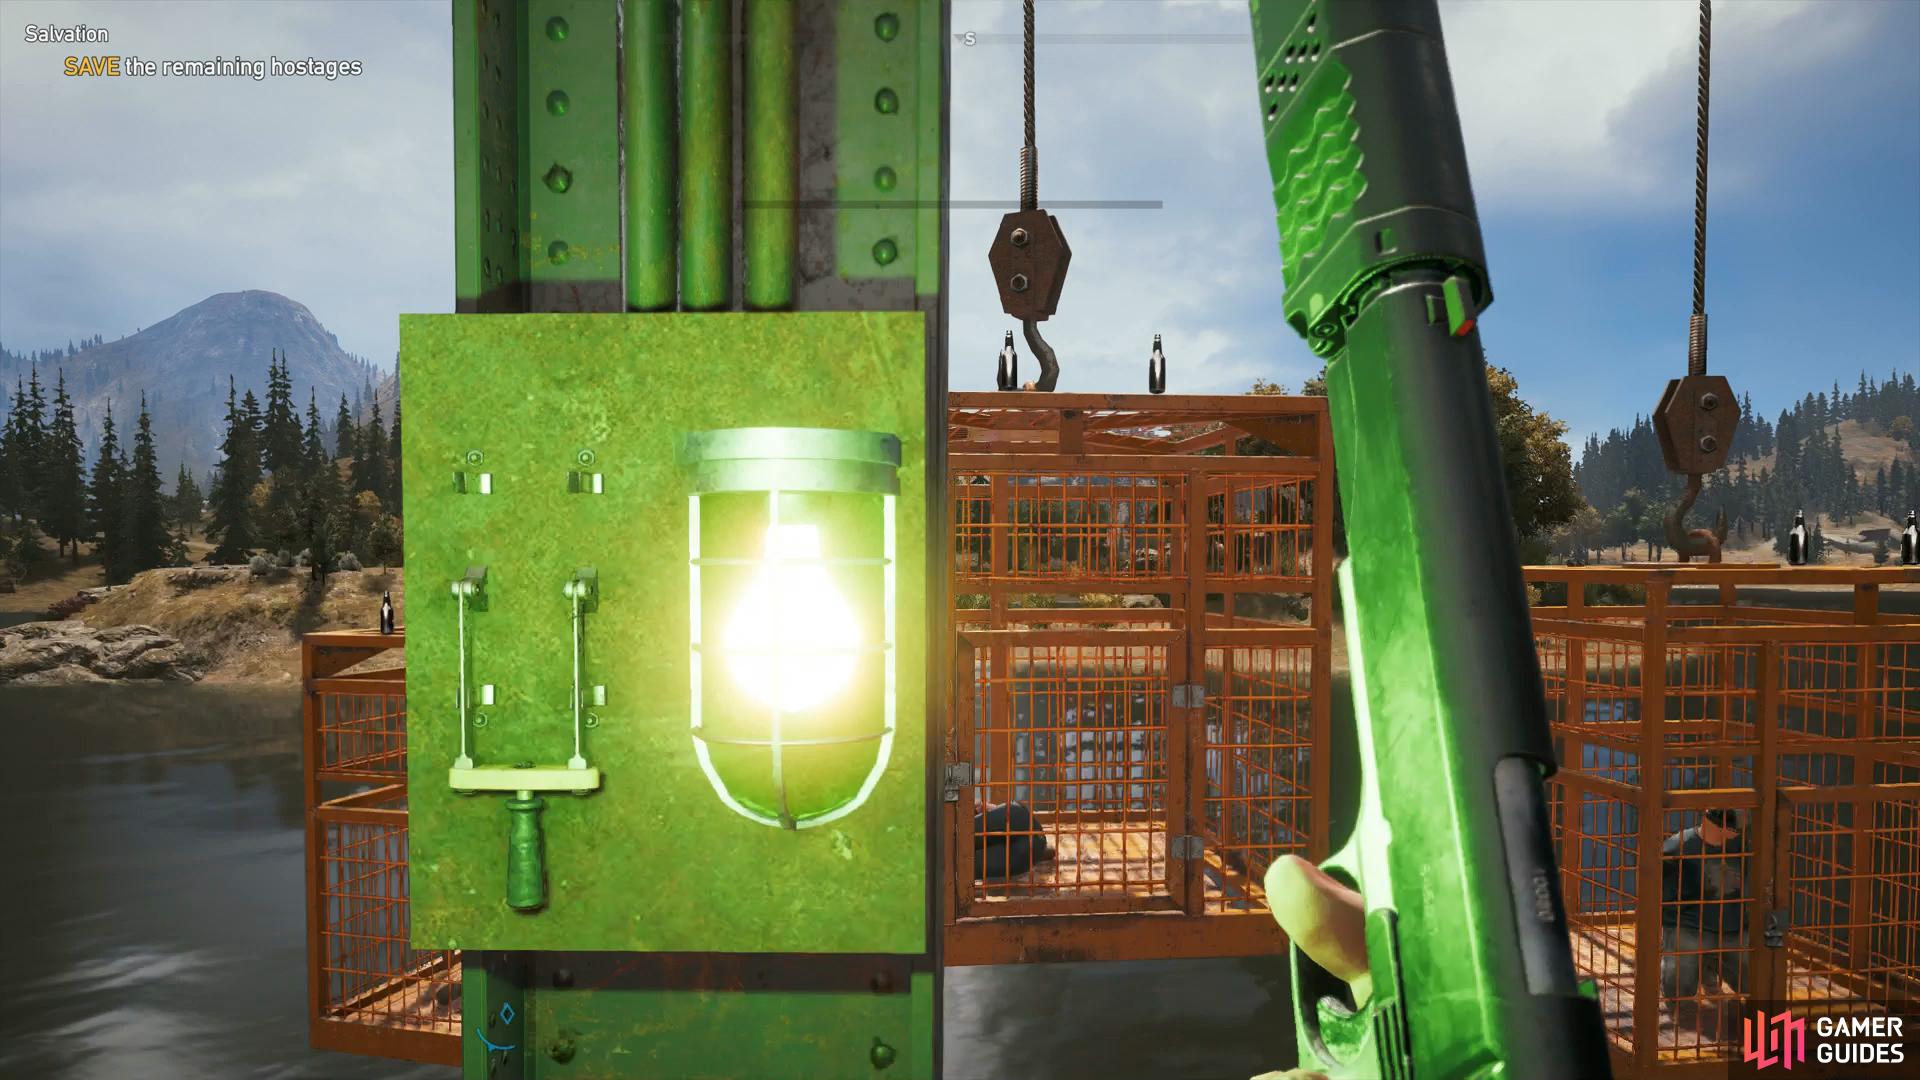 use the switch up top to release the hostage in the cage.